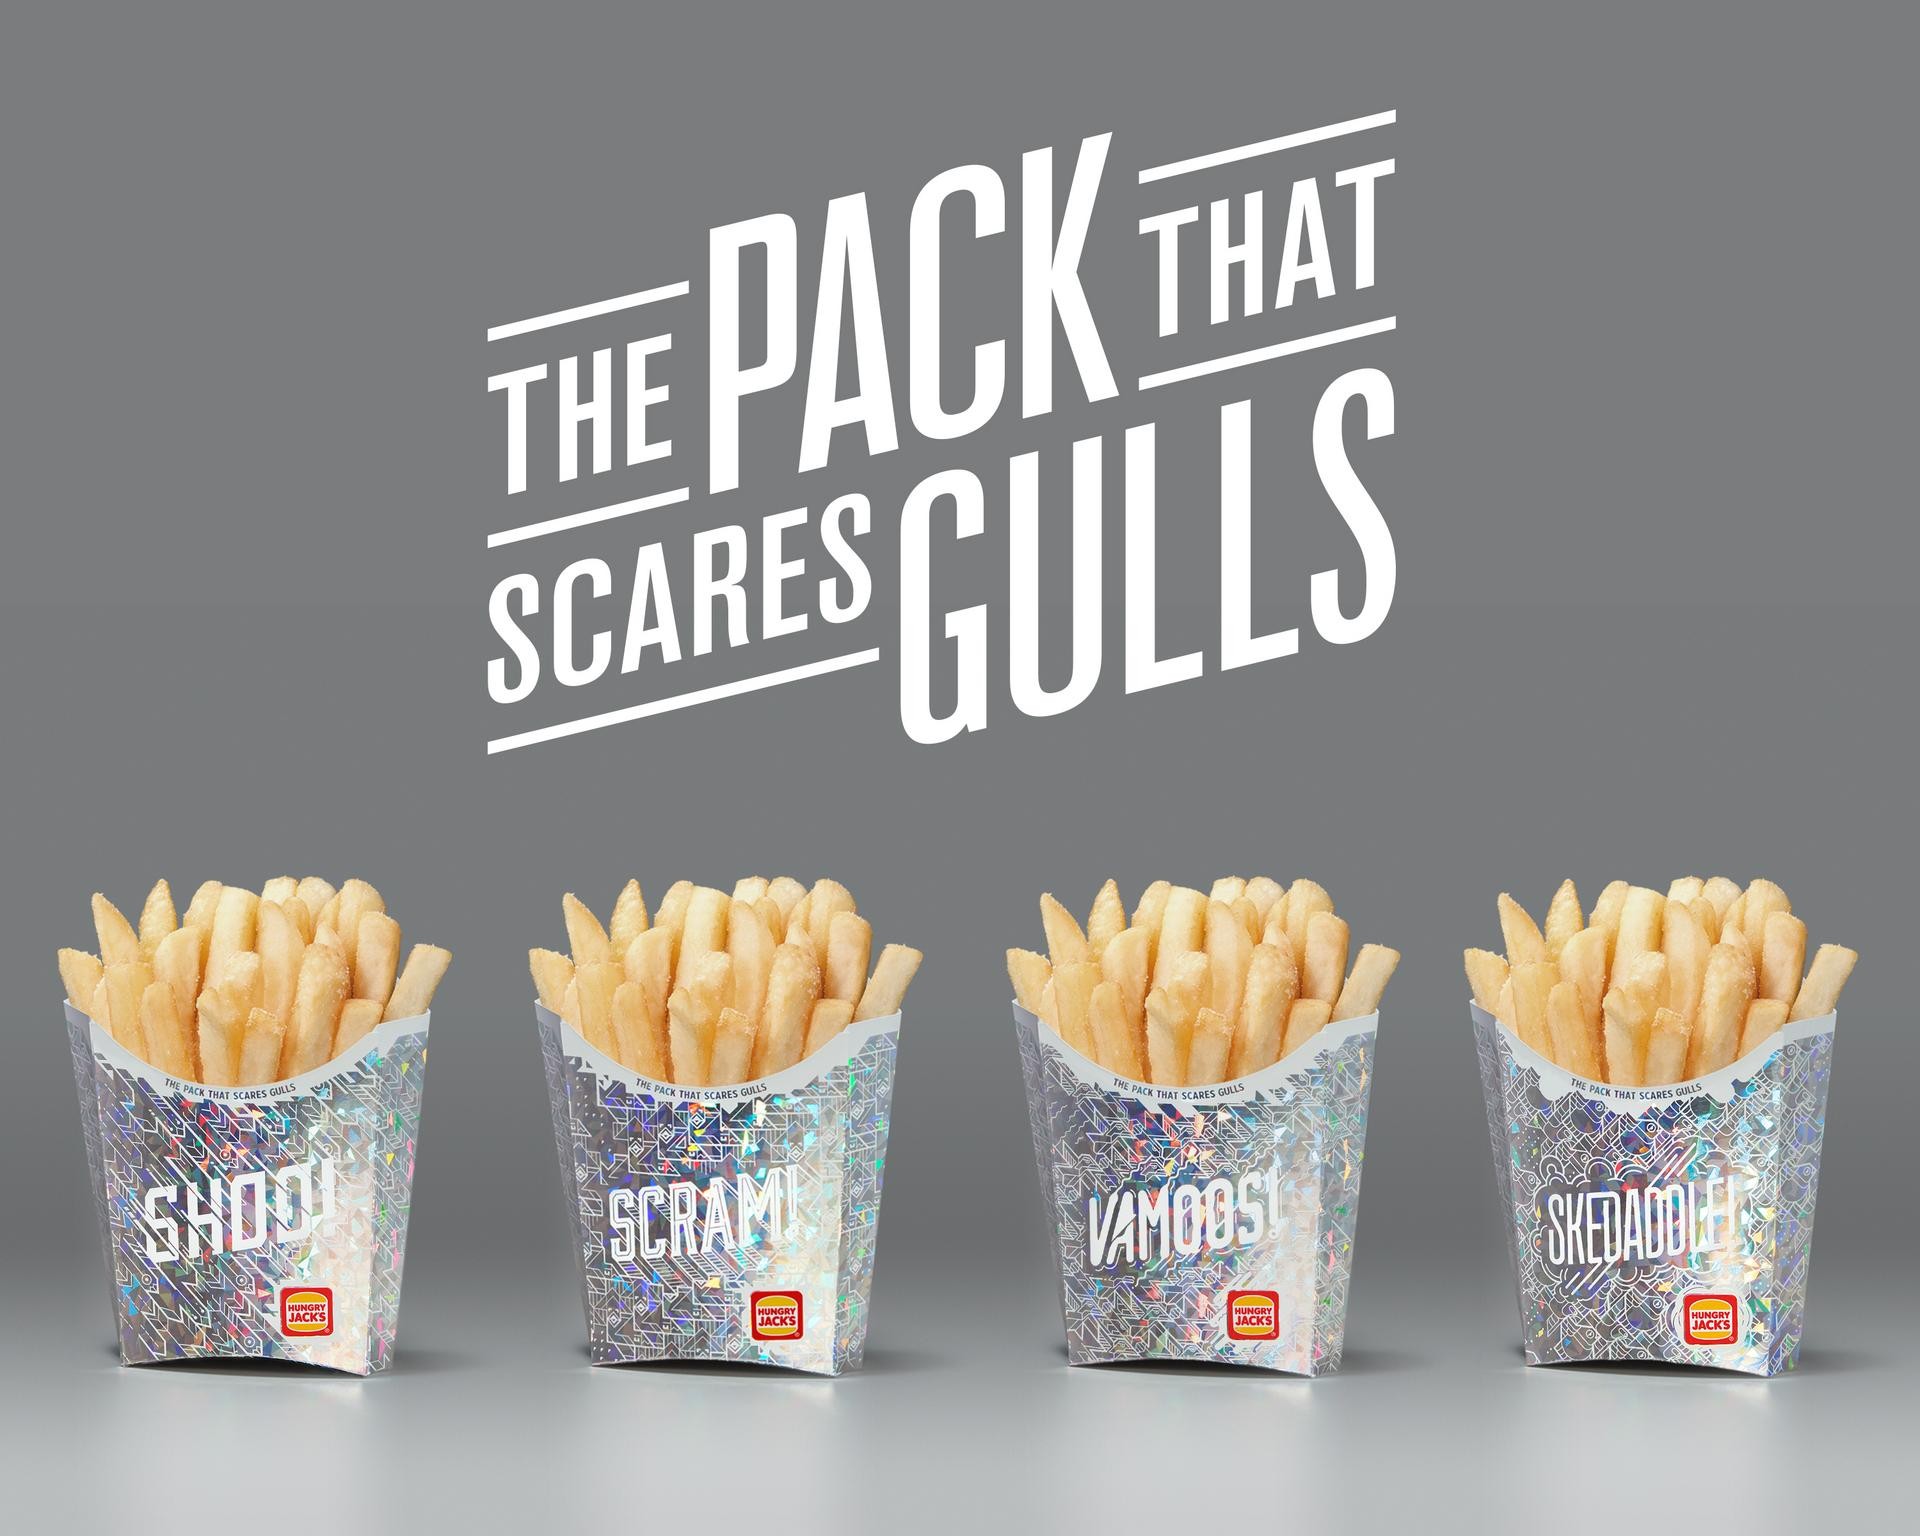 The Packs That Scare Gulls